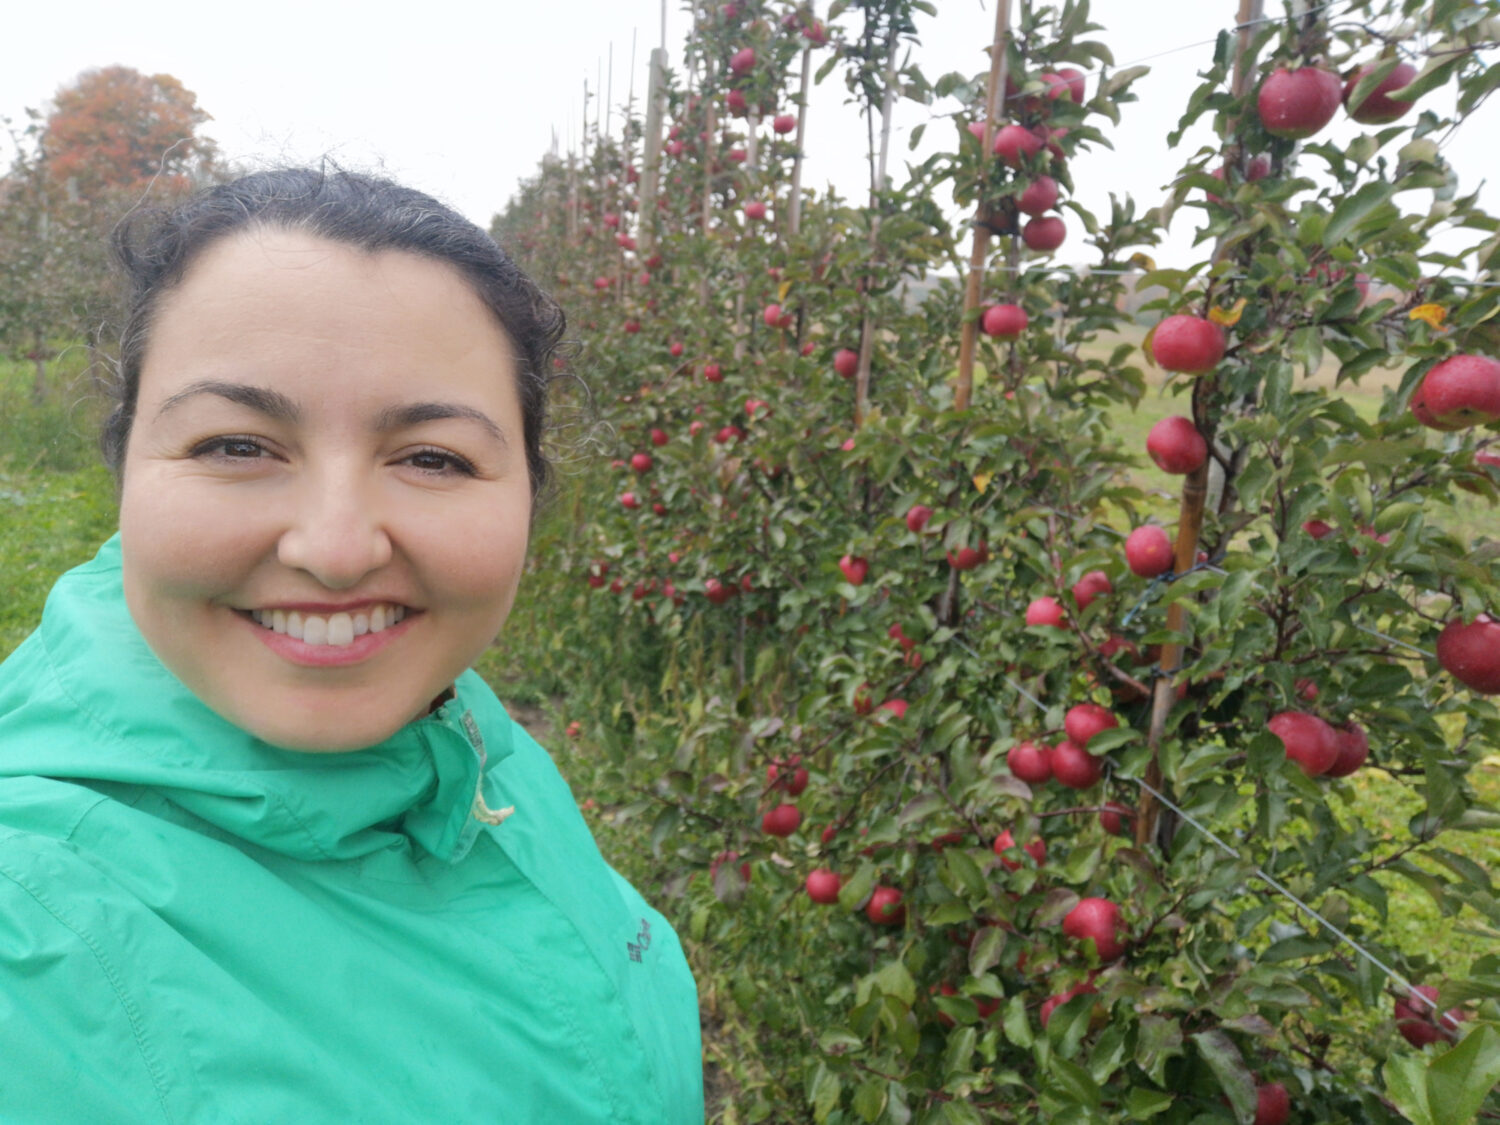 Image of a woman in a green windbreaker with brown hair that is pulled back. She is smiling at the camera next to a trellis of red flowers